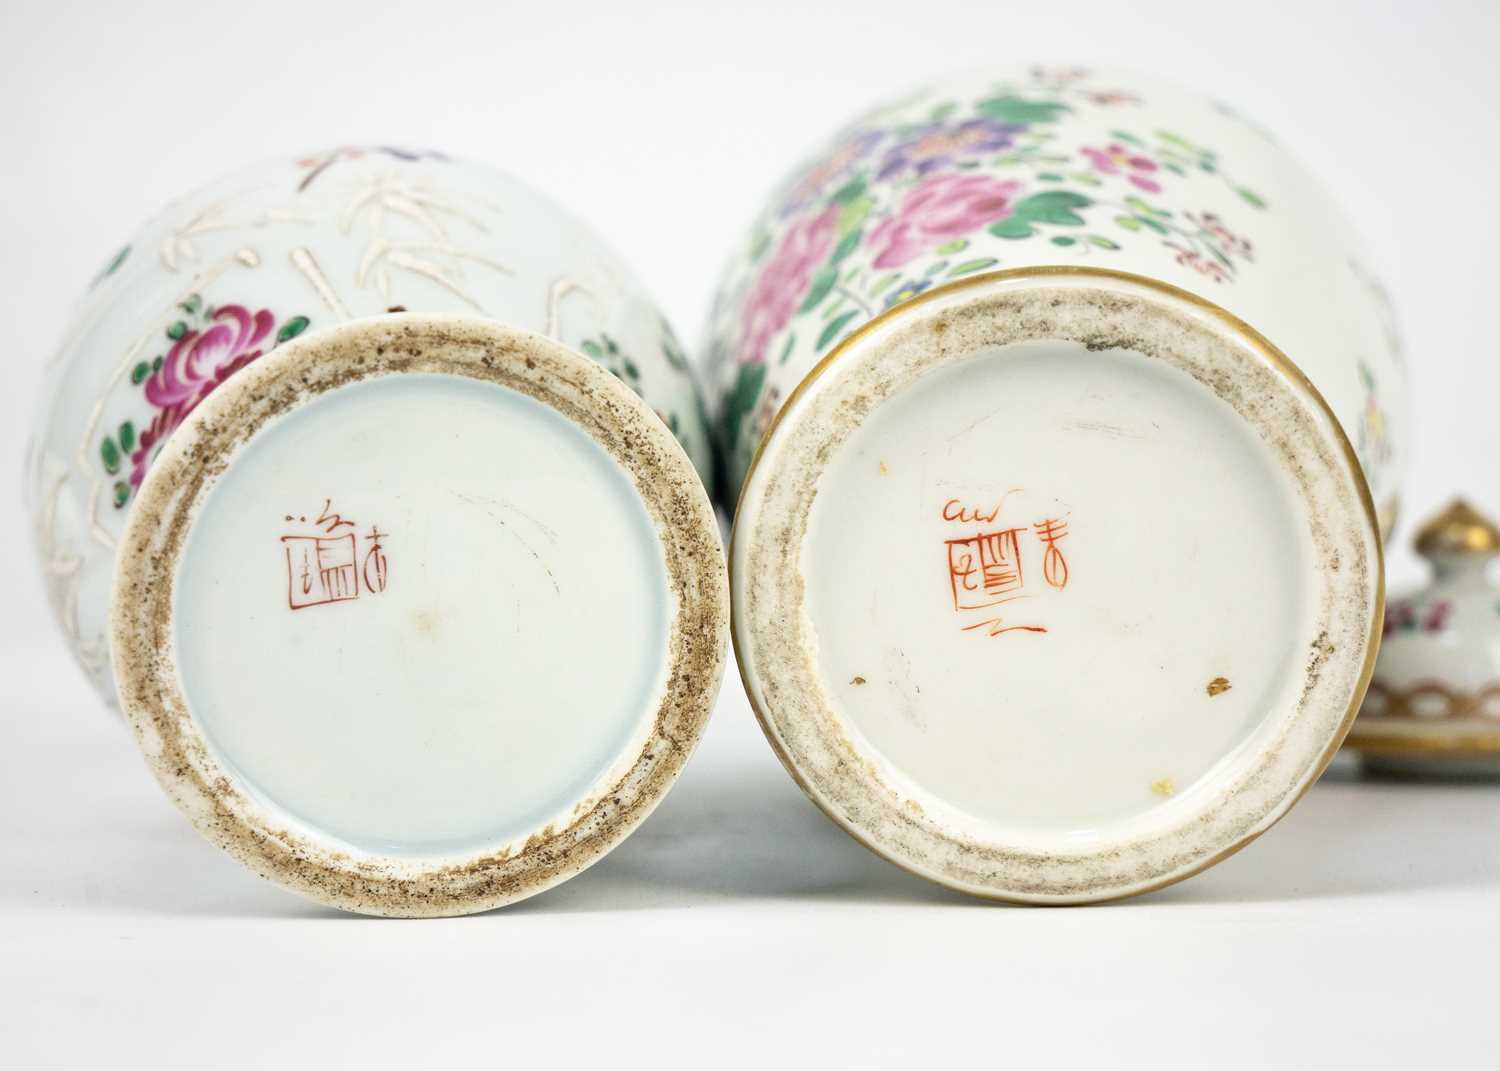 Two Samson porcelain famille rose vases, in Chinese export style, circa 1900. - Image 6 of 12